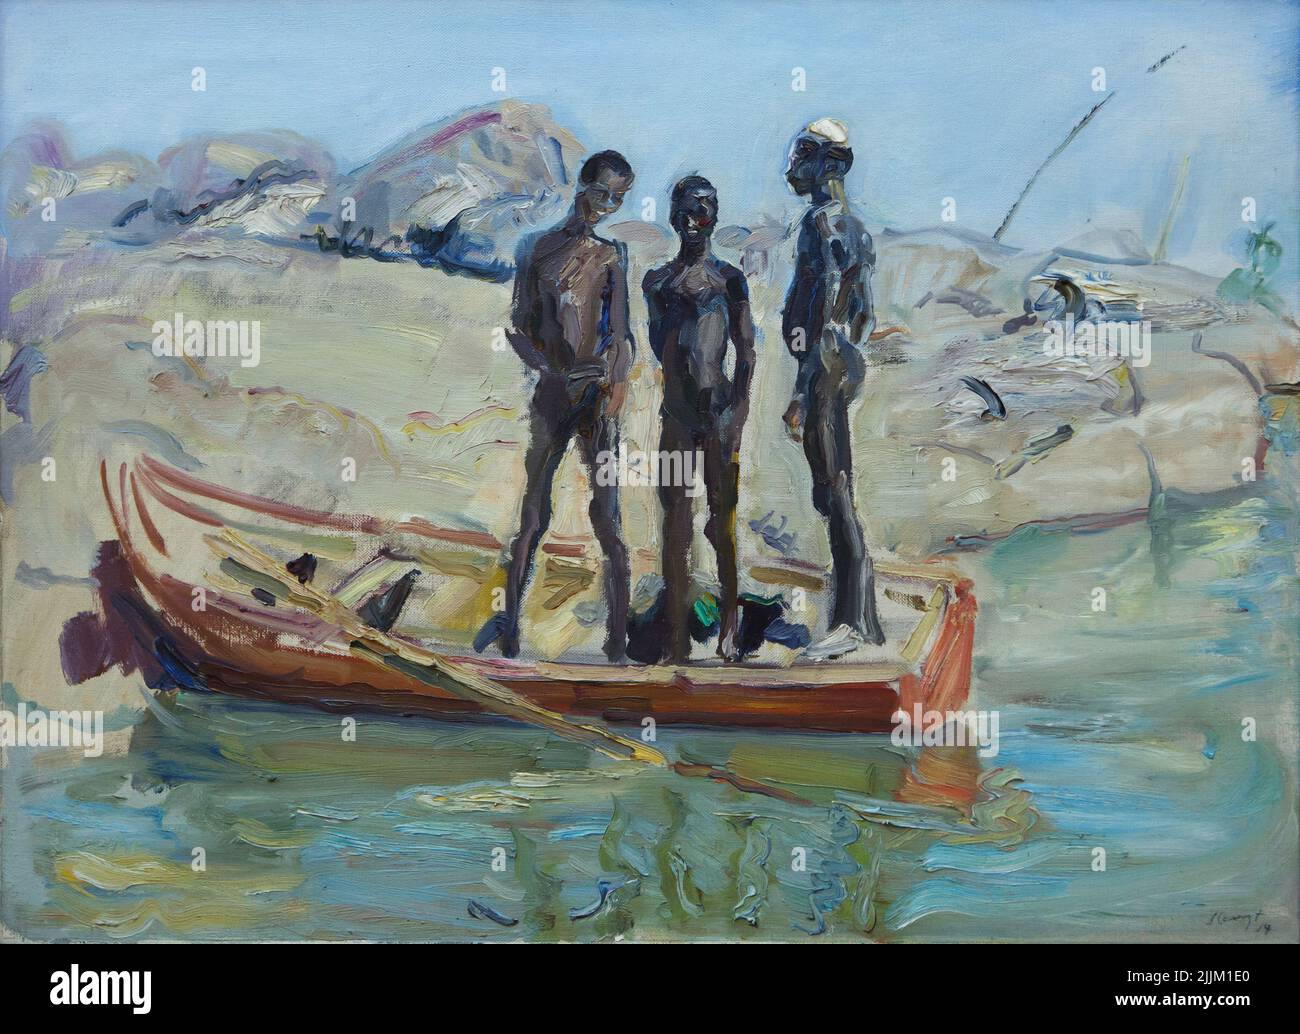 Painting 'Three Sudanese Men in a Barge' from the series 'Paintings of the Voyage to Egypt' by German Impressionist painter Max Slevogt (1914) on display in the Gаlеriе Nеuе Mеistеr (Nеw Маstеrs Gаllеry) in the Аlbеrtinum in Drеsdеn, Gеrmаny. Stock Photo